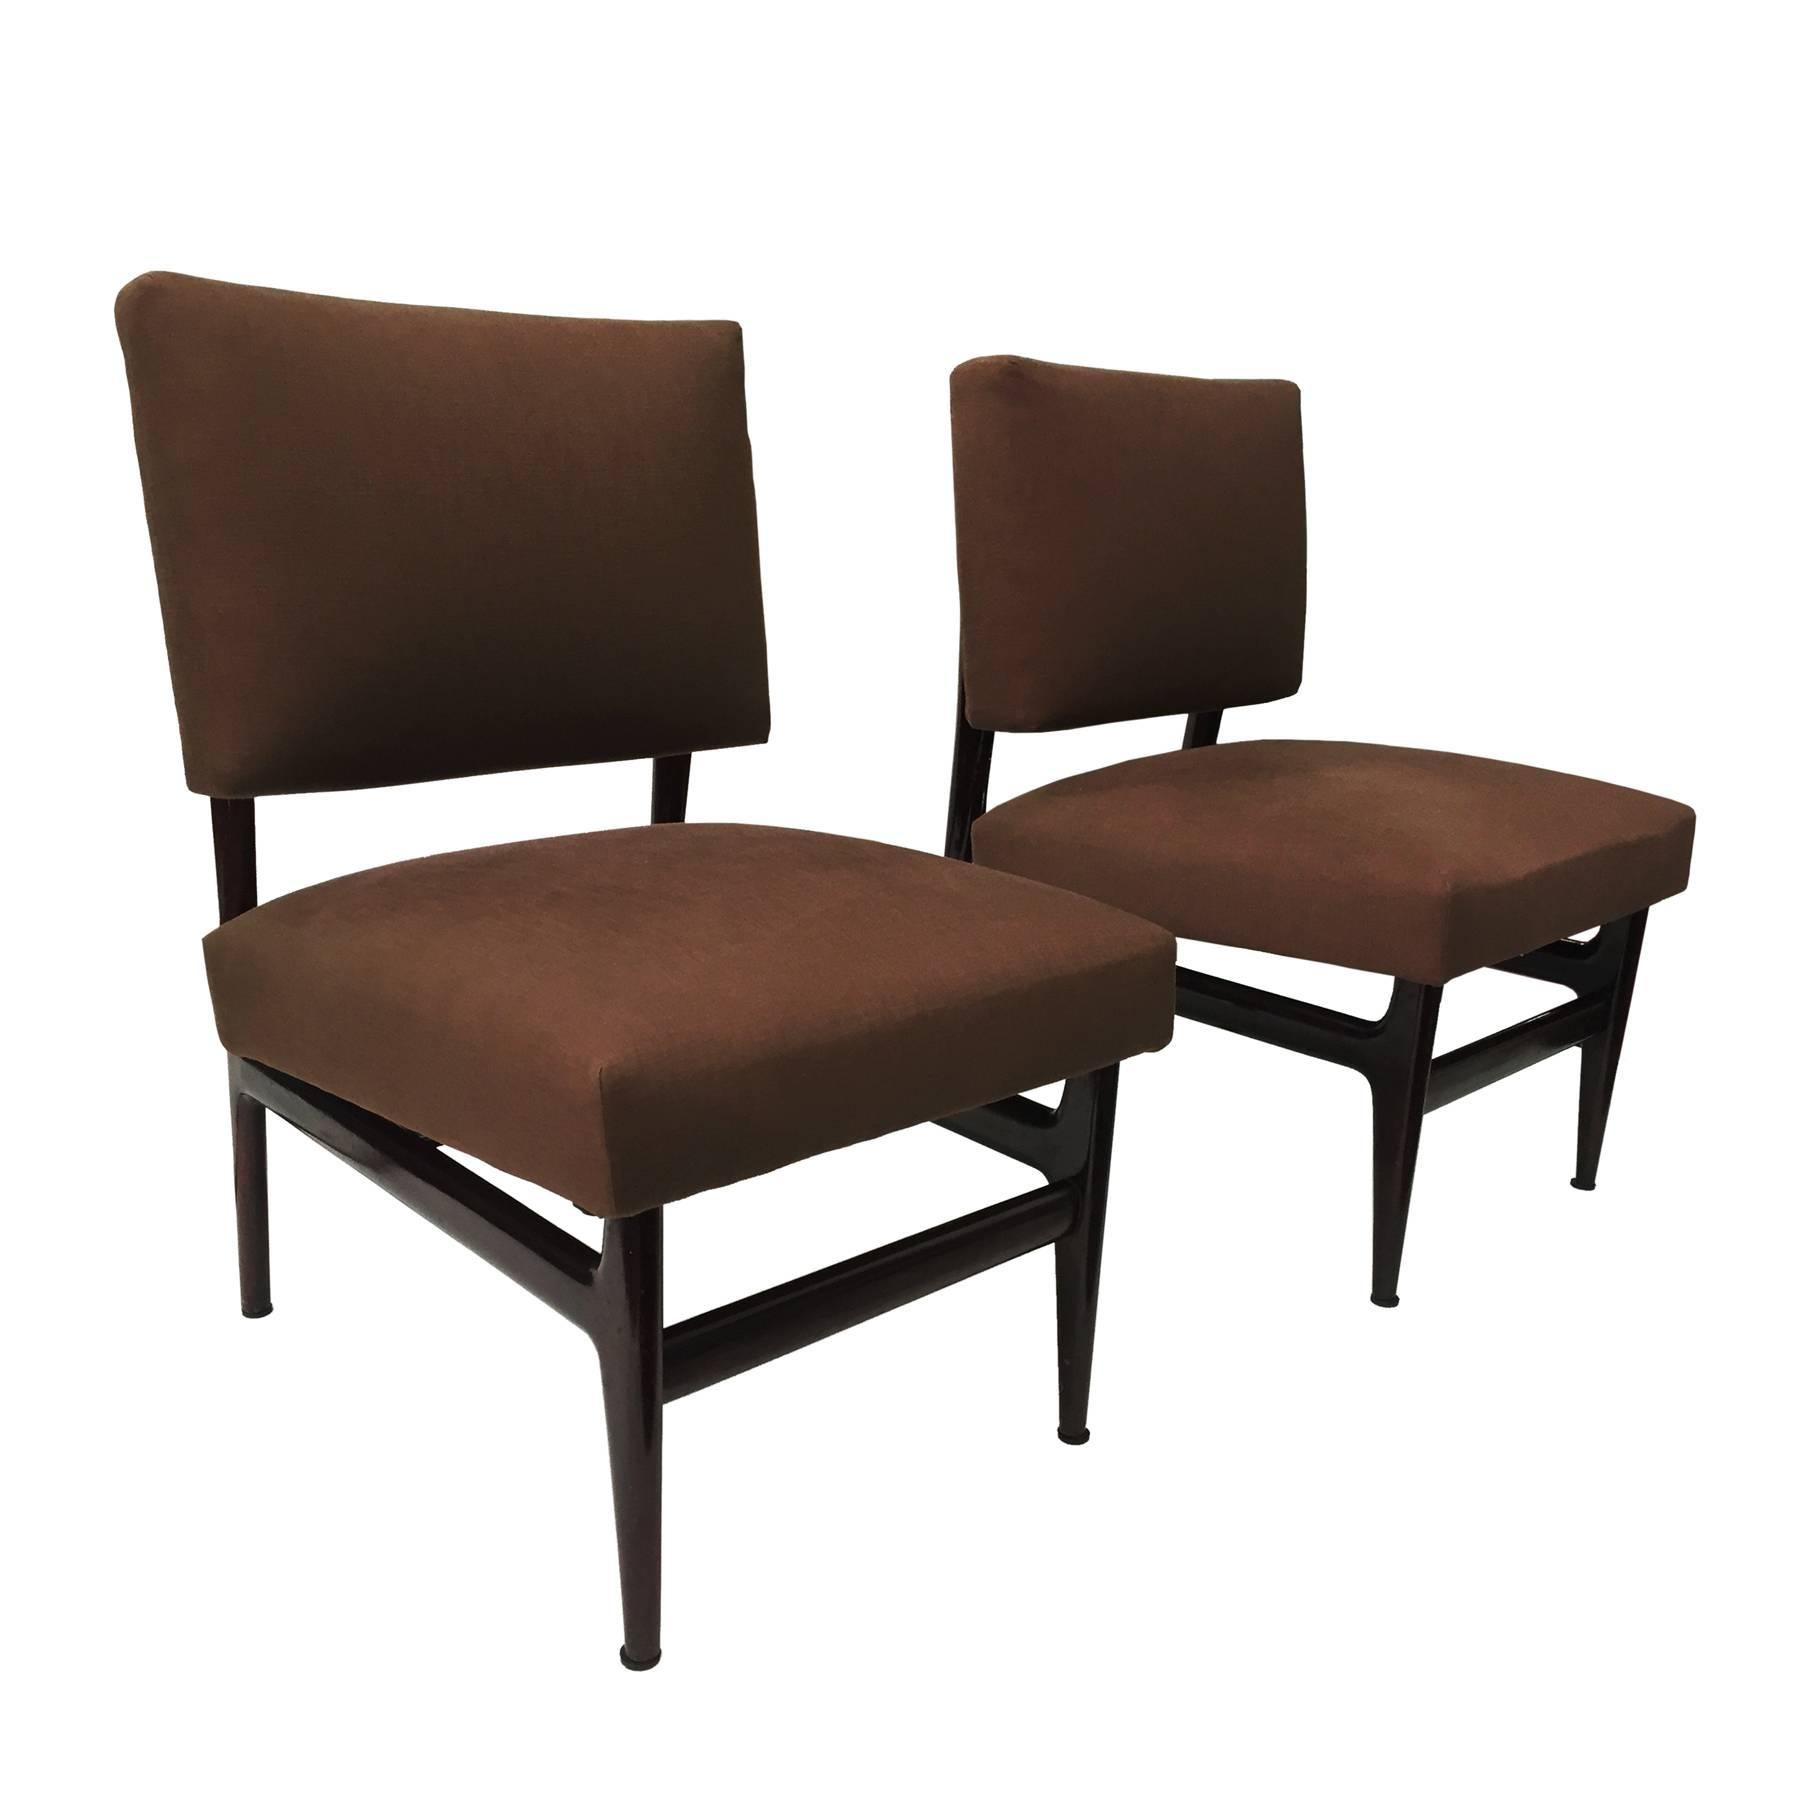 Italian Mid-Century Lounge Chairs by Vittorio Dassi, Set of Two, 1950s For Sale